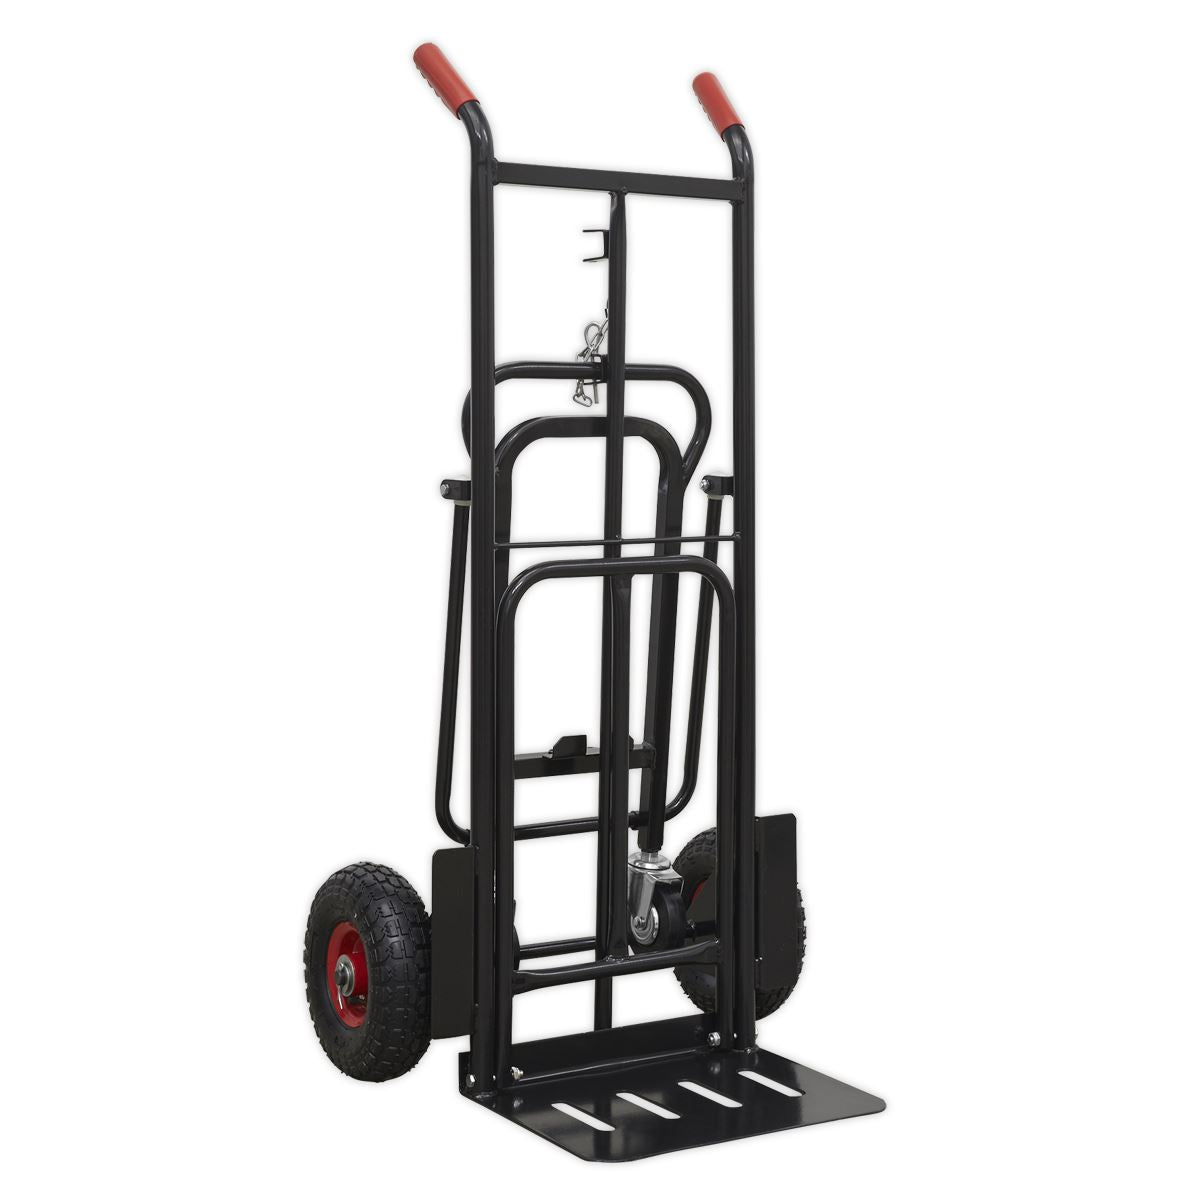 Sealey Premier Heavy-Duty 3-in-1 Sack Truck with PU Tyres 300kg Capacity